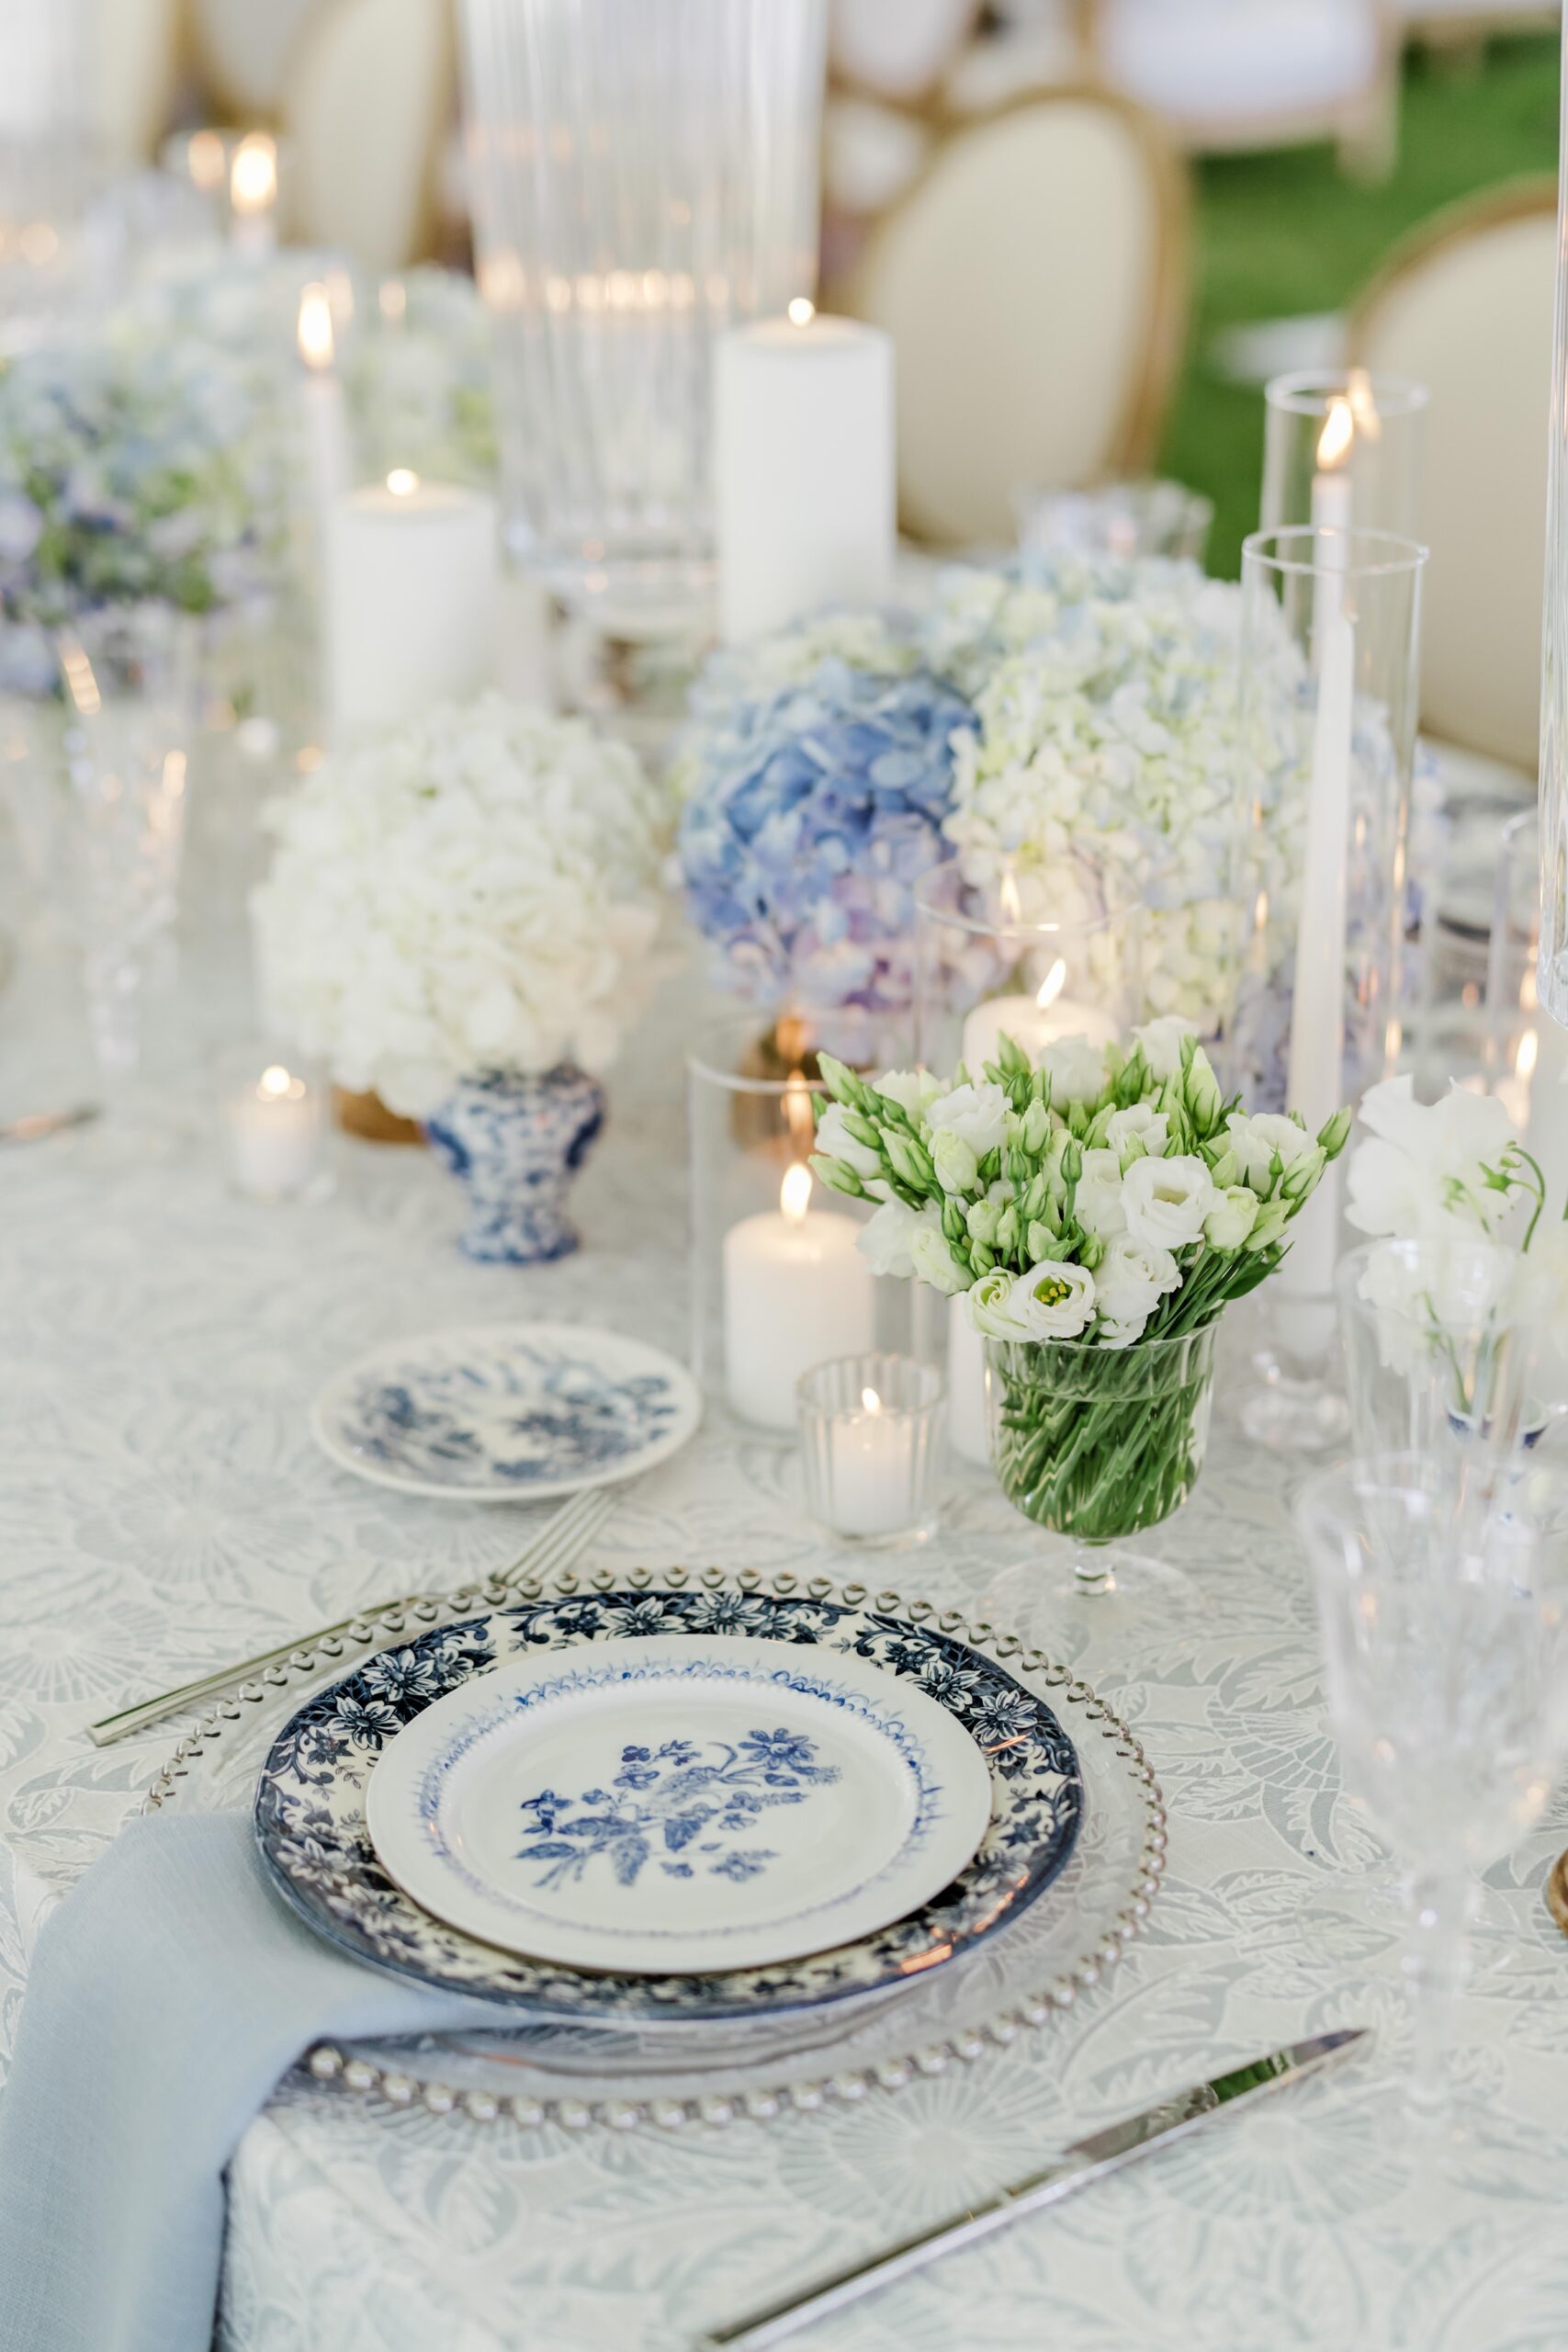 Romantic candles and unique china at the wedding reception